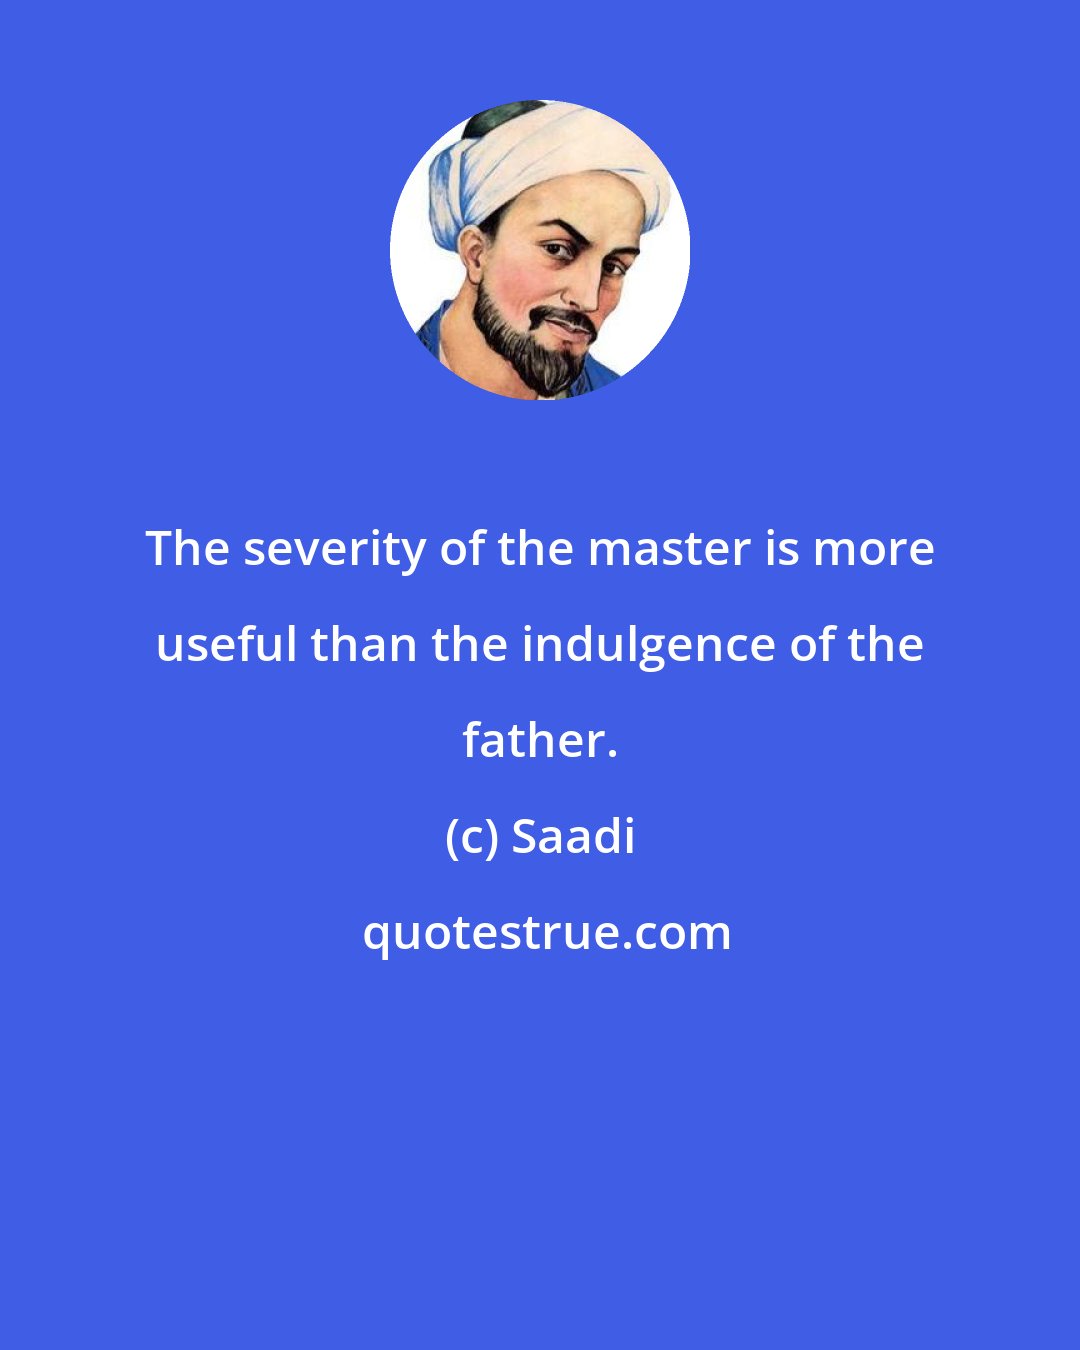 Saadi: The severity of the master is more useful than the indulgence of the father.